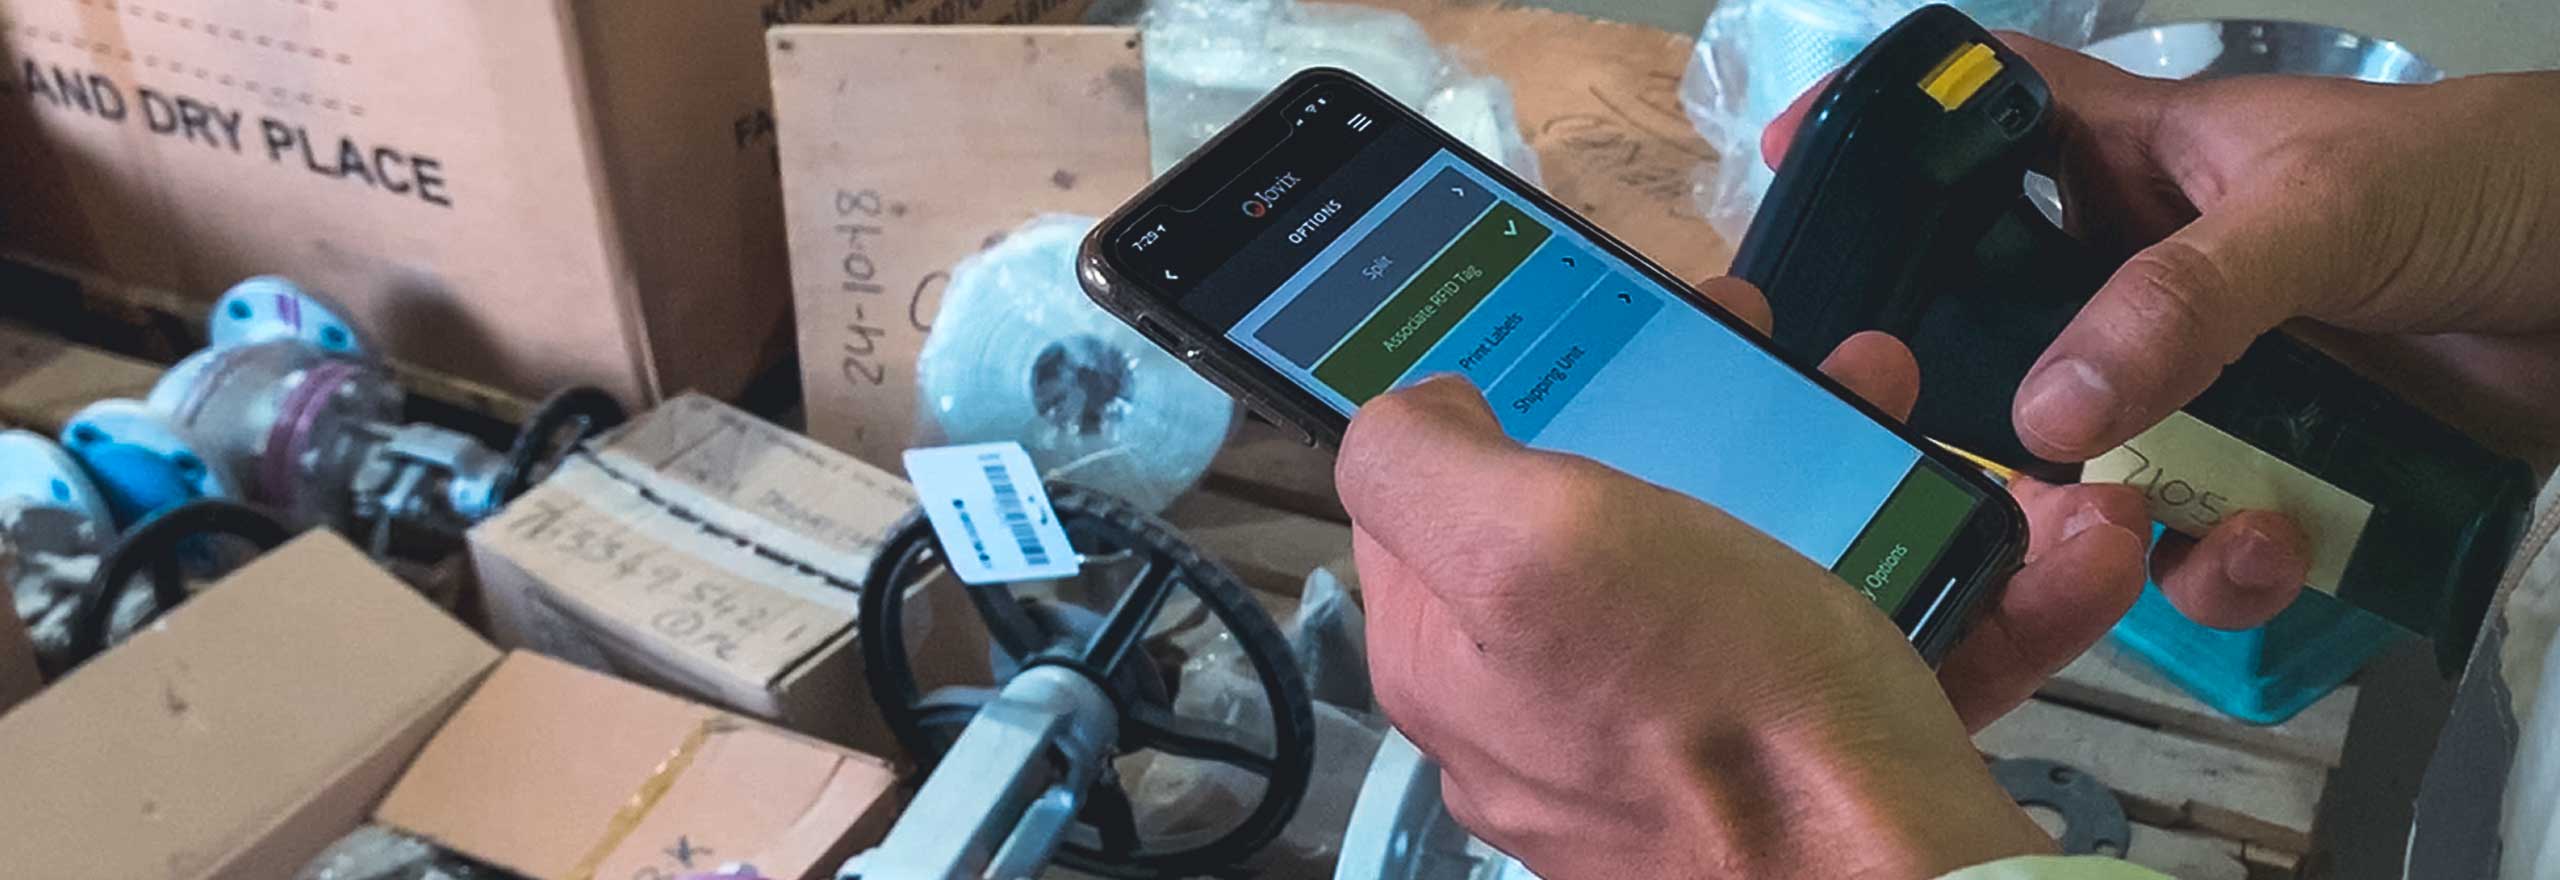 Close up of supply manager with smartphone in front of various packaged products